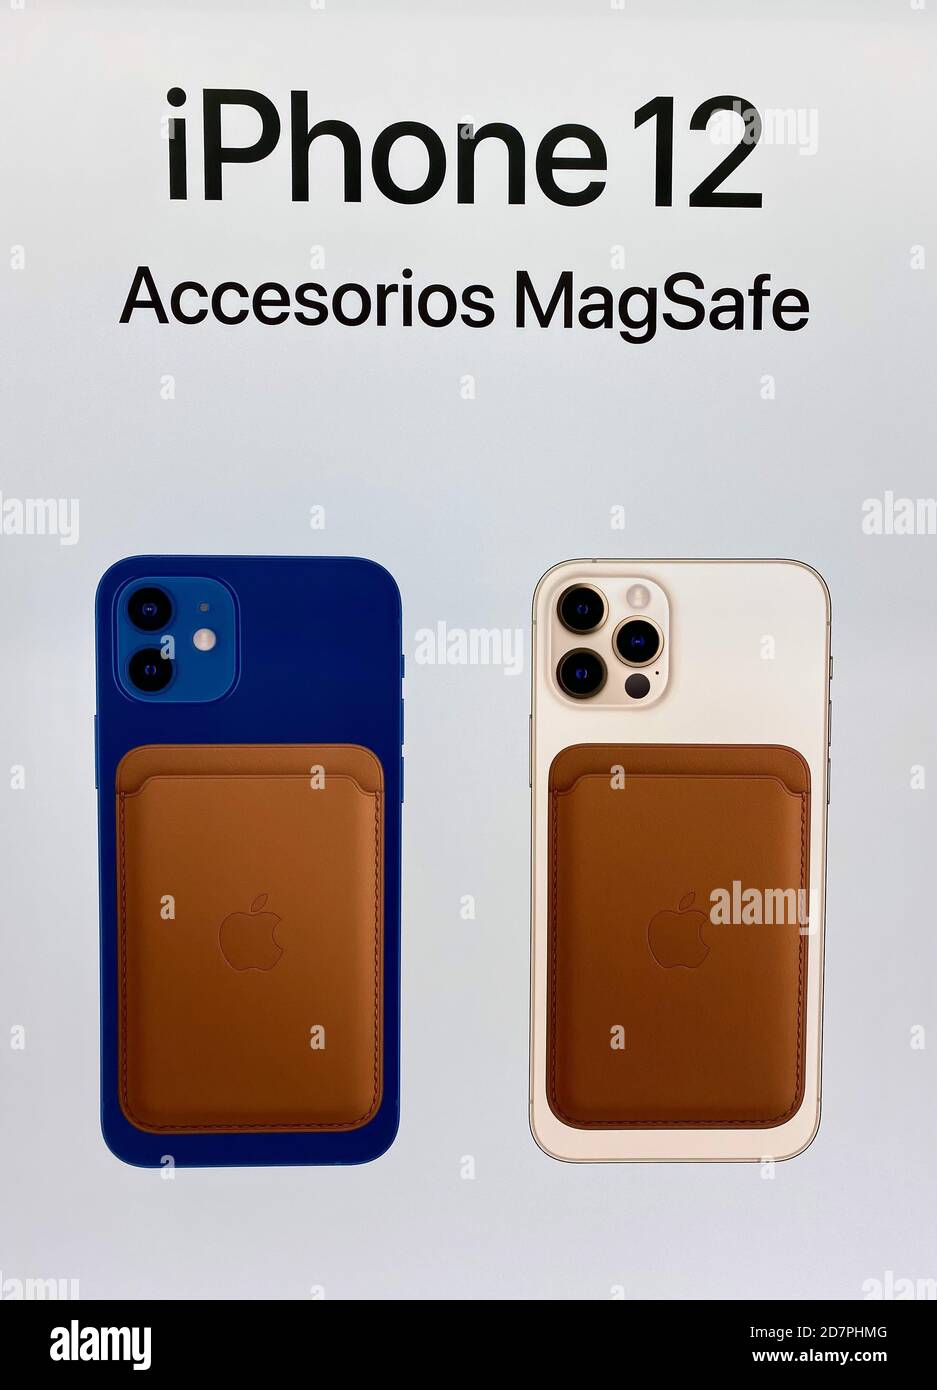 Oviedo, Spain - October 24, 2020: Advertising poster on an App Store  announcing the iPhone 12 Pro accessories Magsafe Stock Photo - Alamy